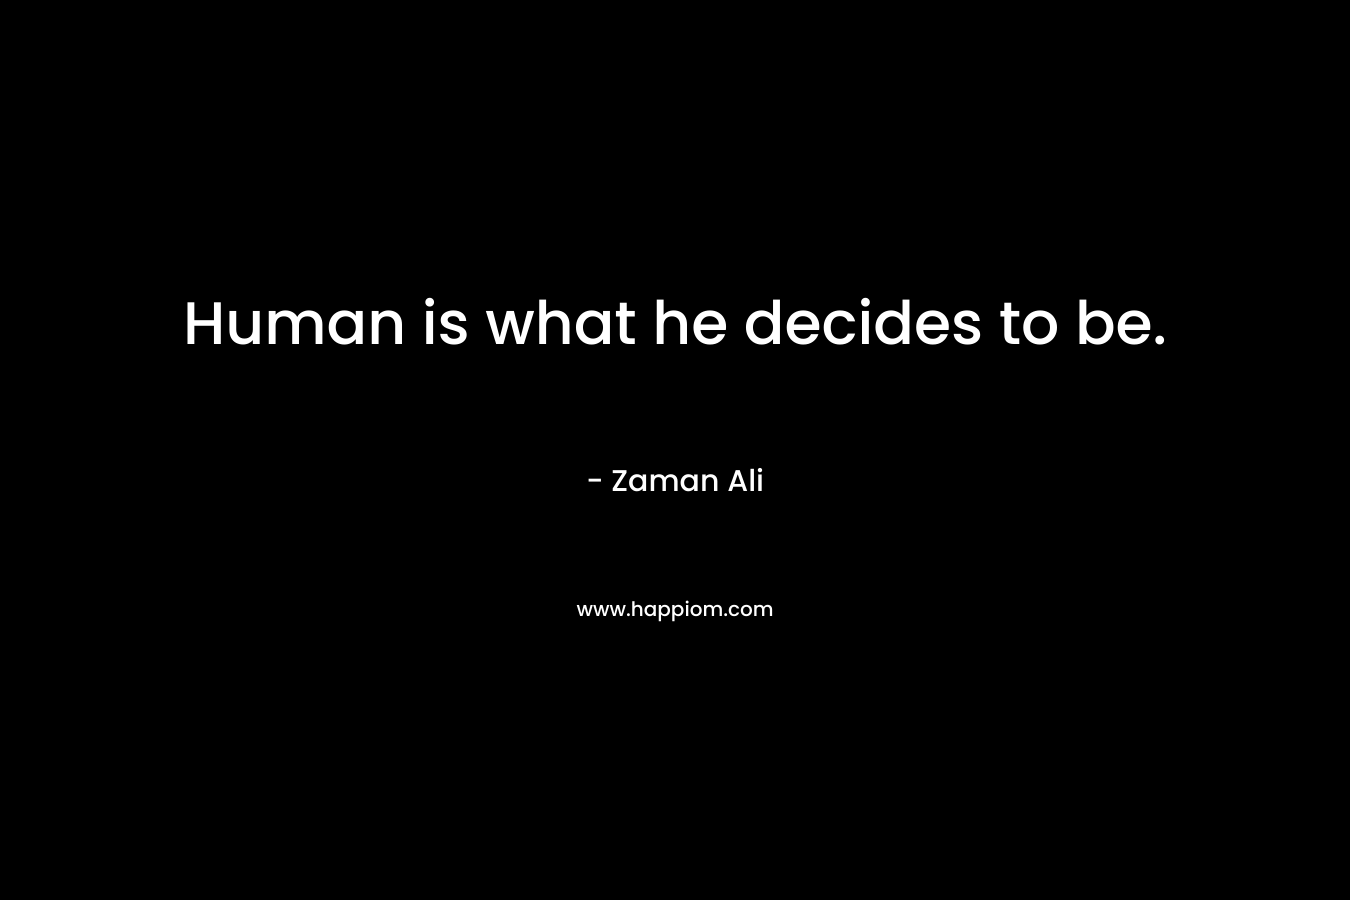 Human is what he decides to be. – Zaman Ali